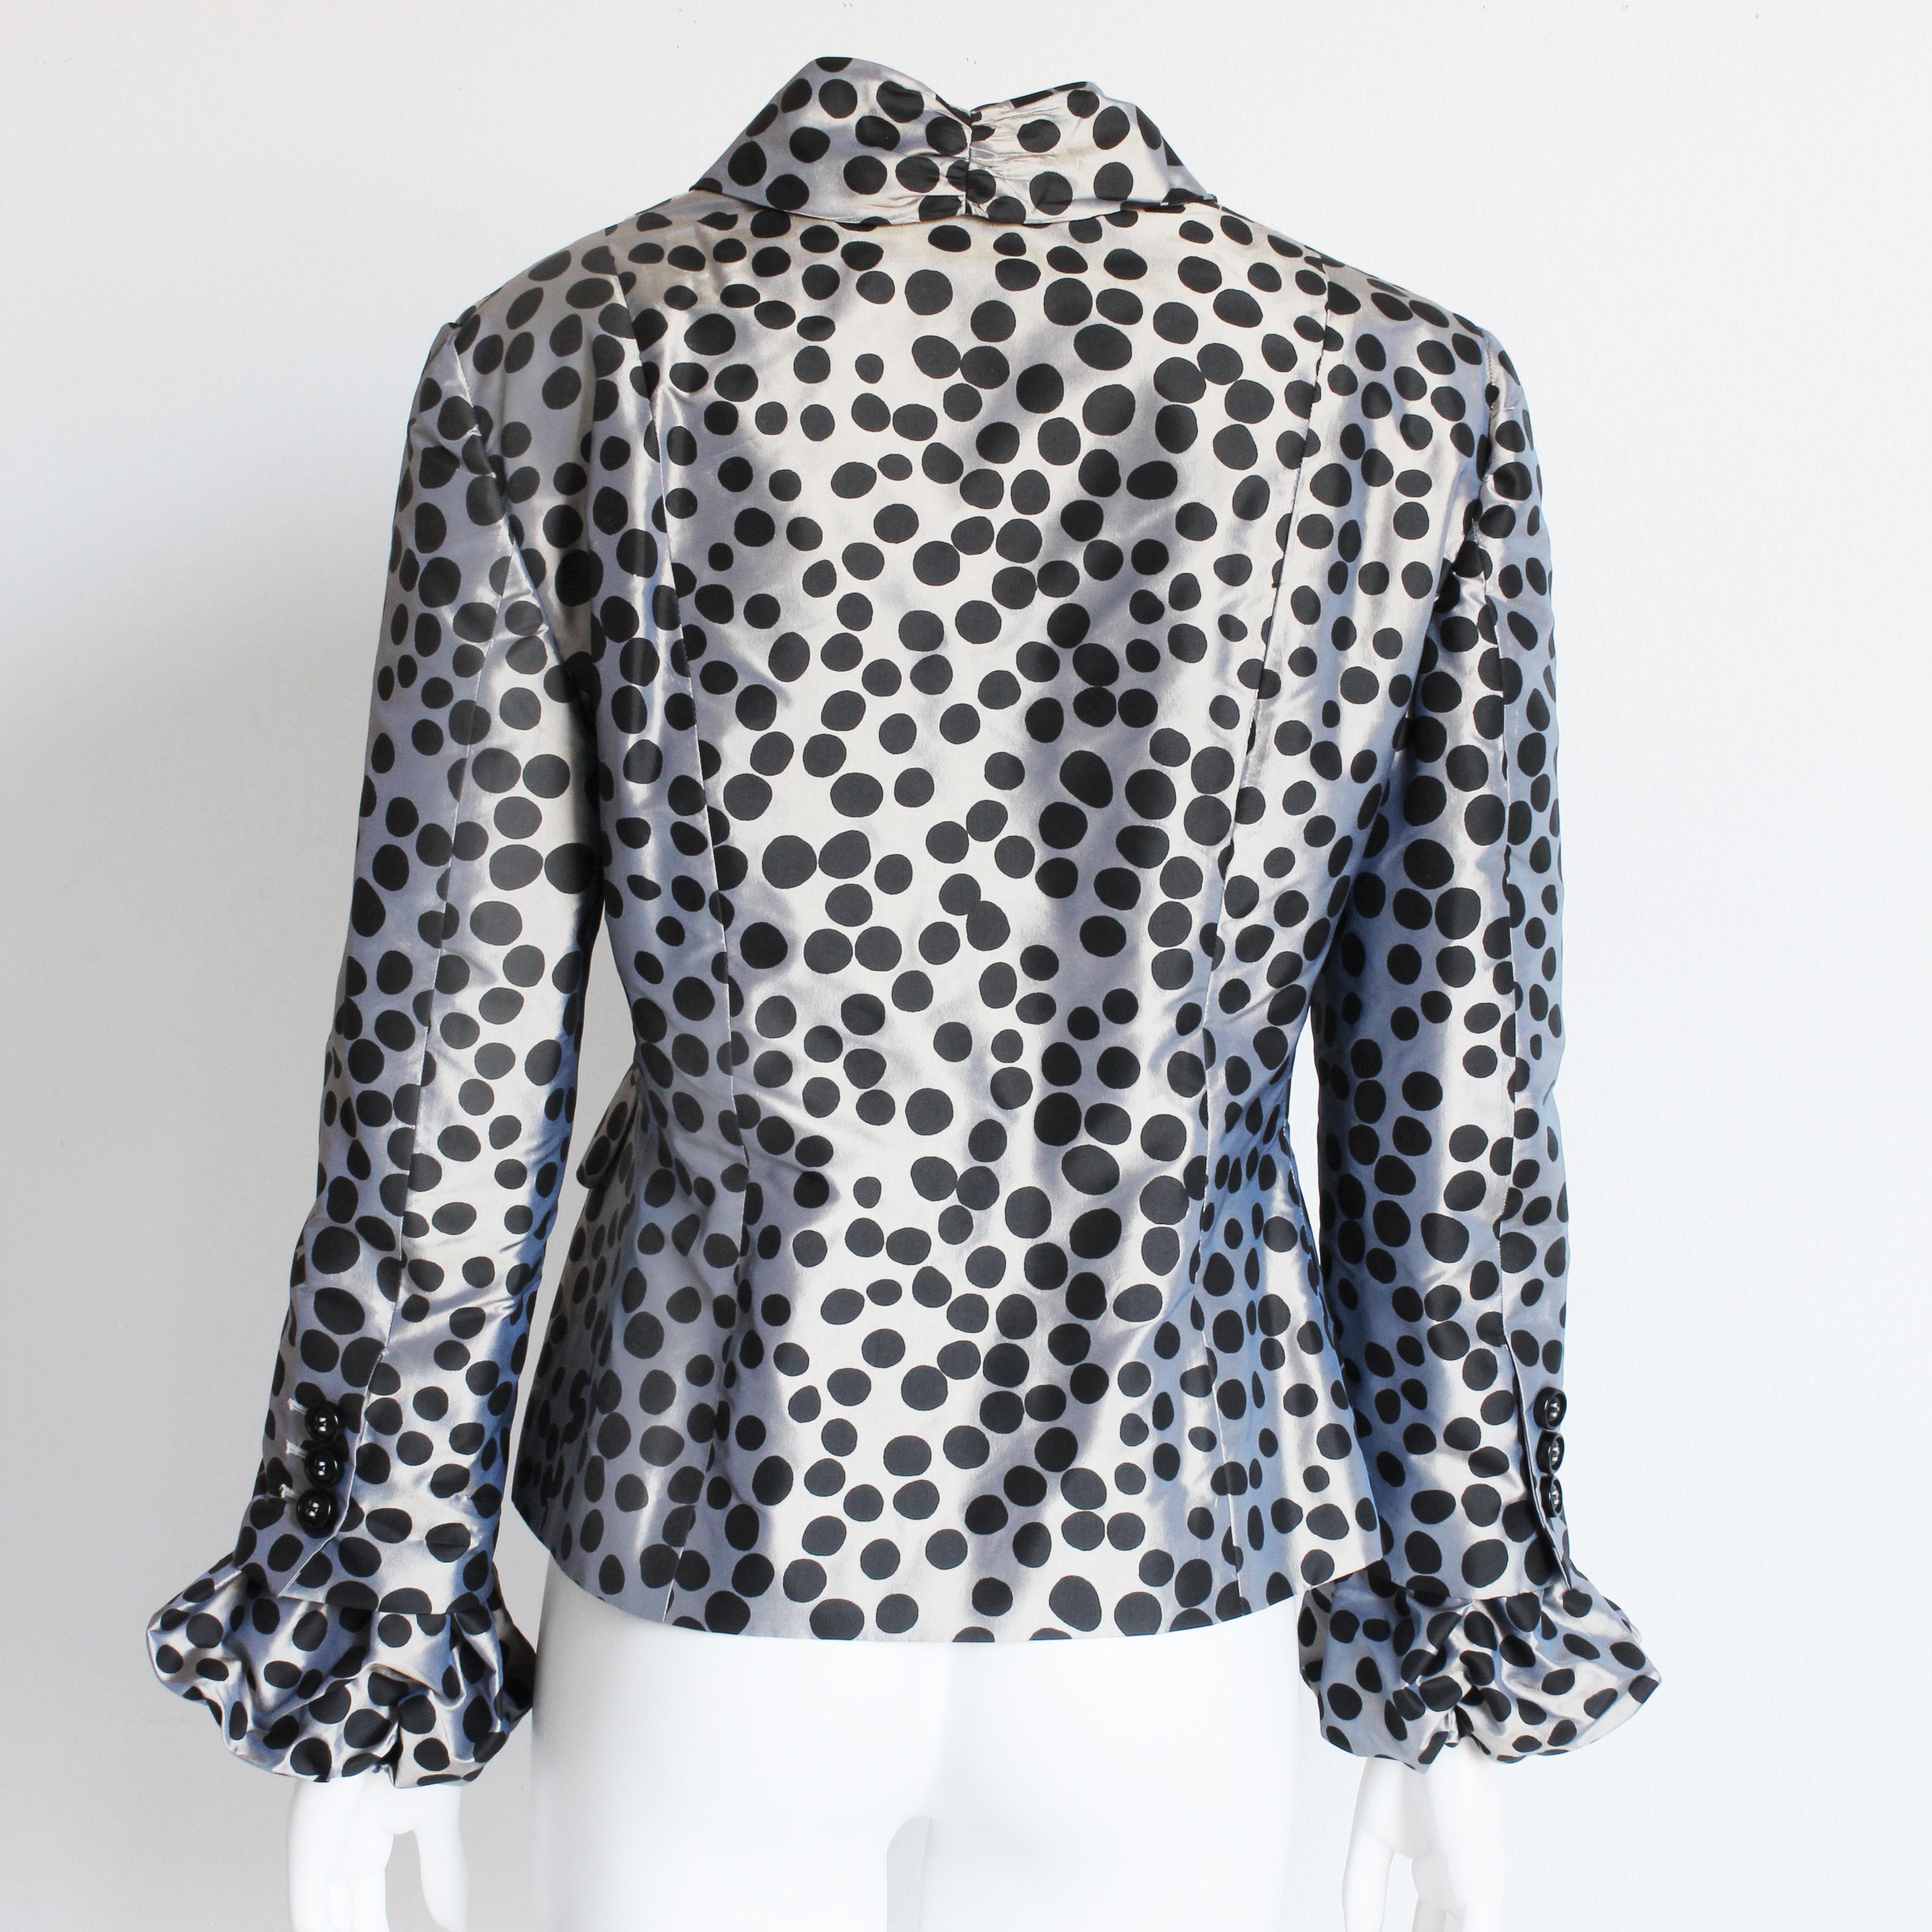 Moschino Jacket Gunmetal Silk with Polka Dots Puff Sleeves Cheap and Chic US 12 For Sale 4